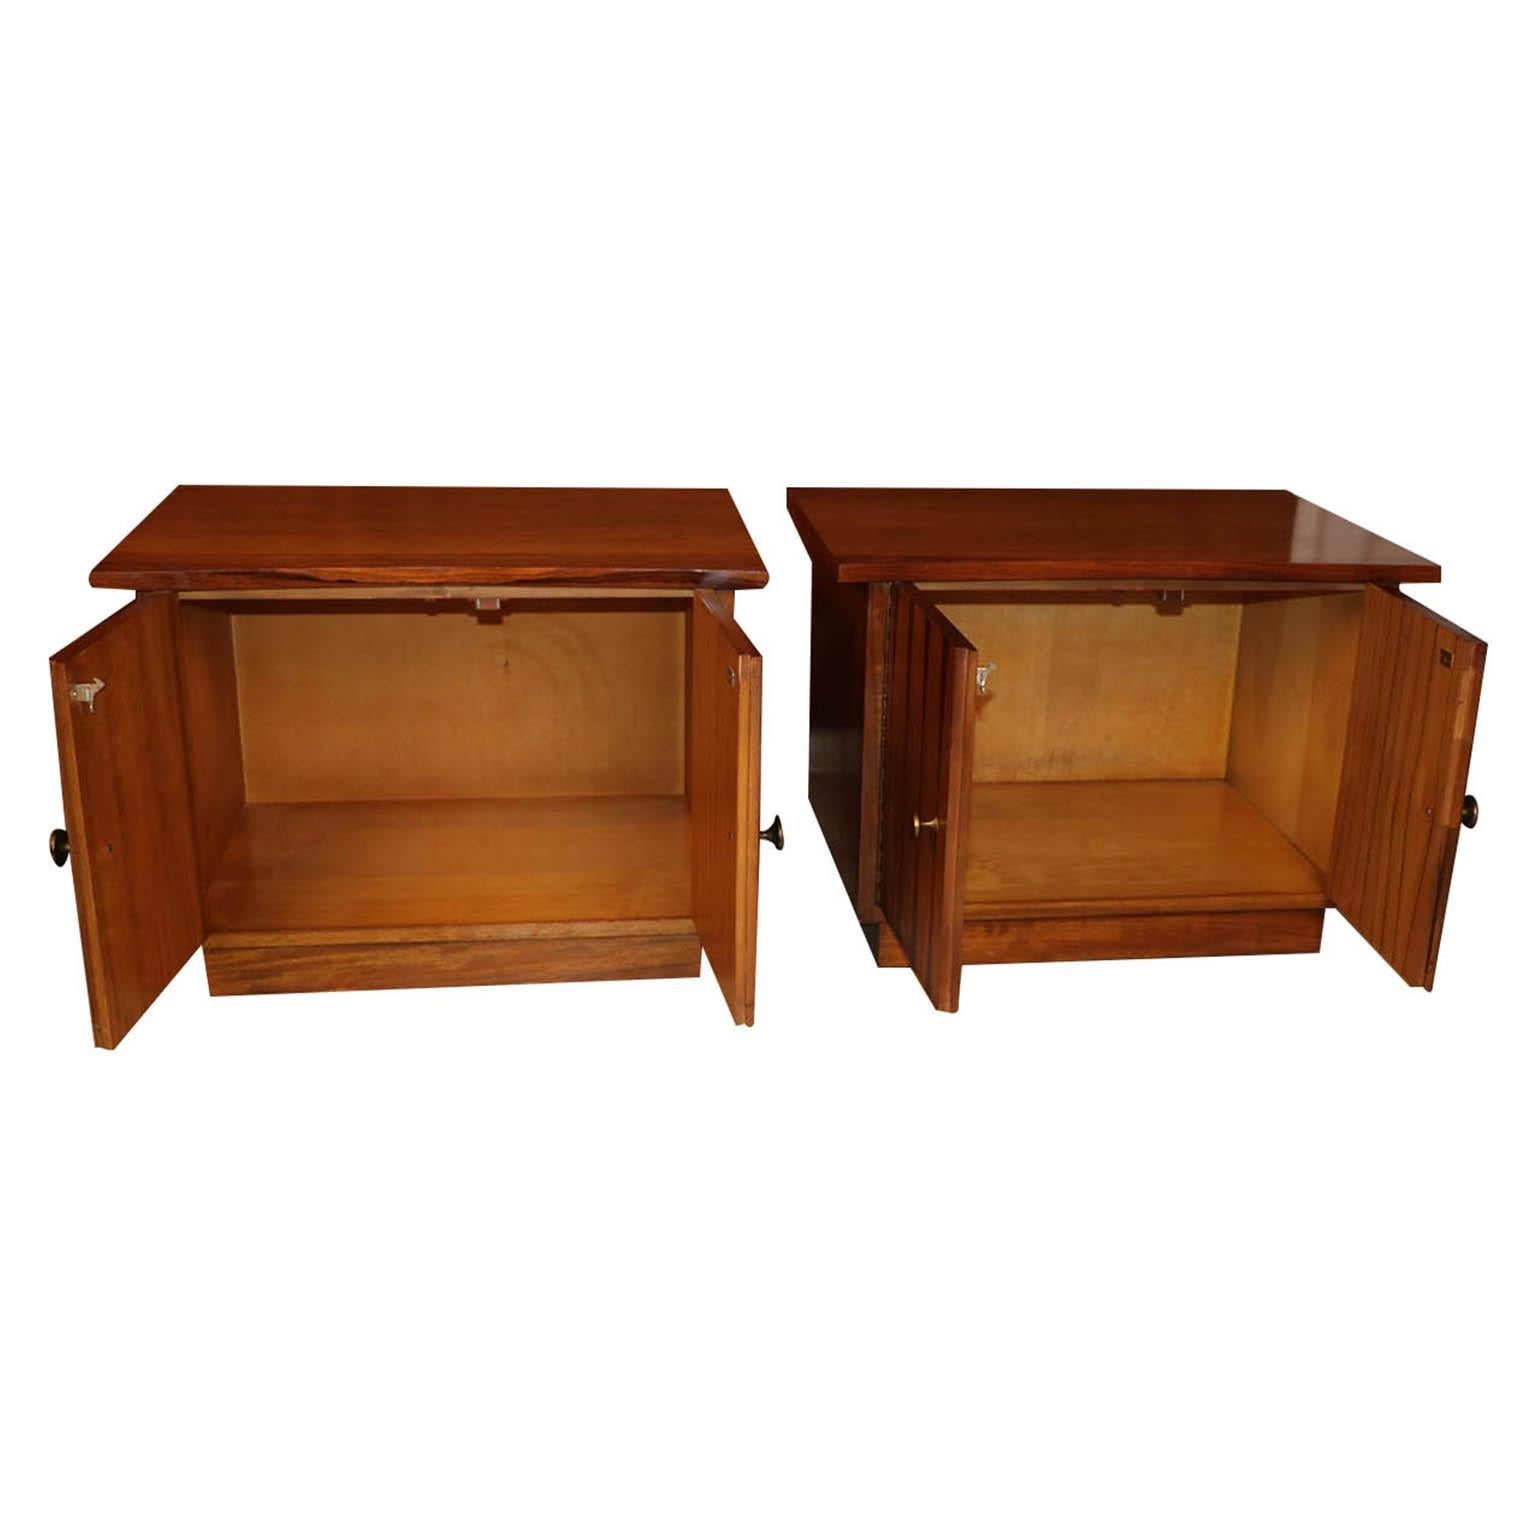 Mid-20th Century Midcentury Lane Furniture Nightstands Cabinets Tables